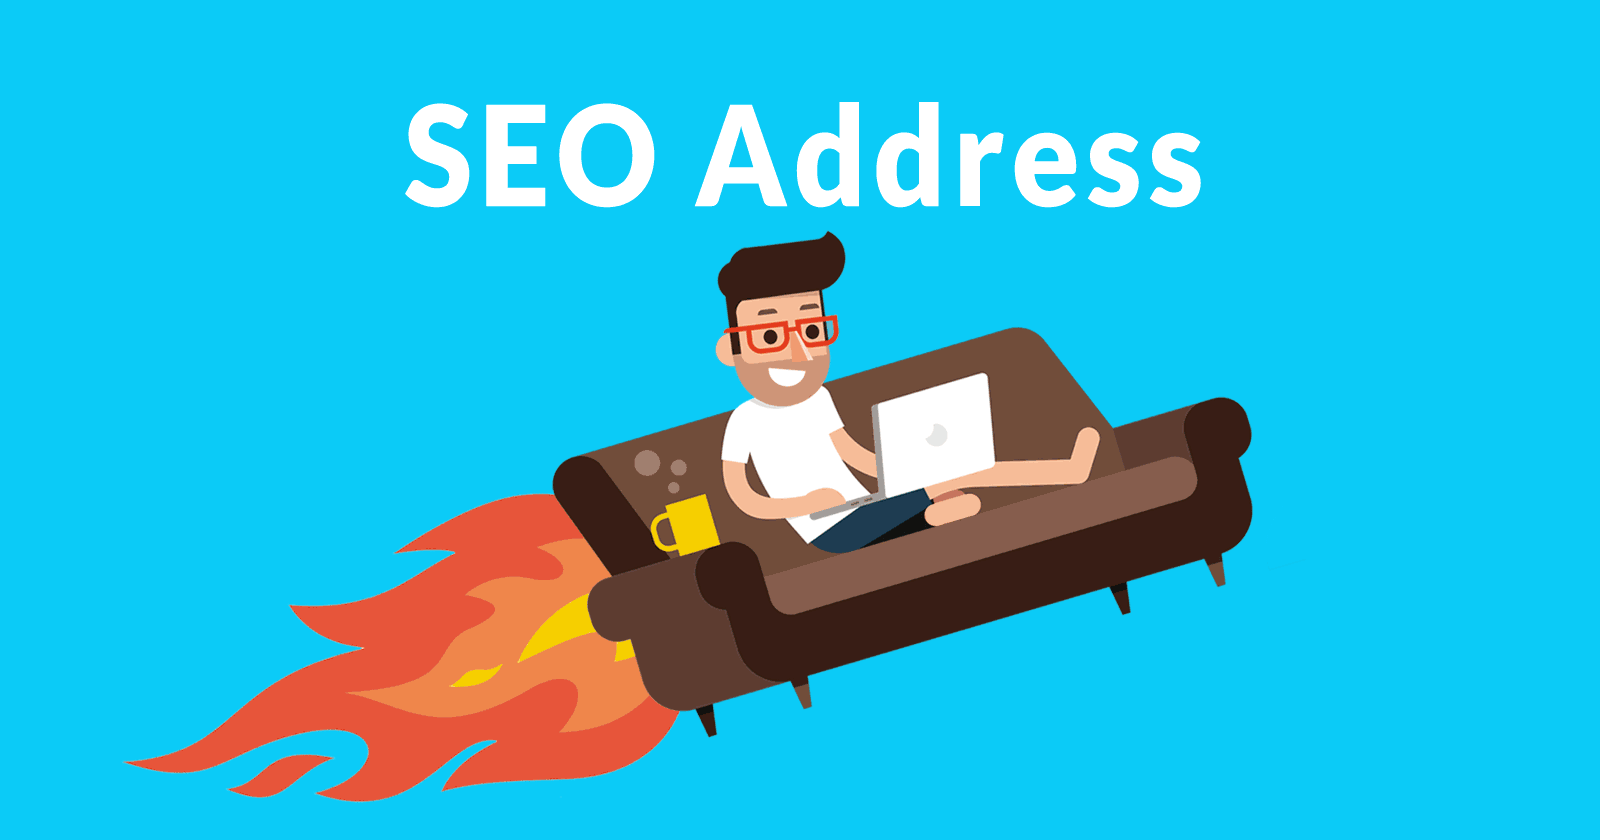 Image of a home freelancer blasting off on his couch, trailing flames, with words SEO Address